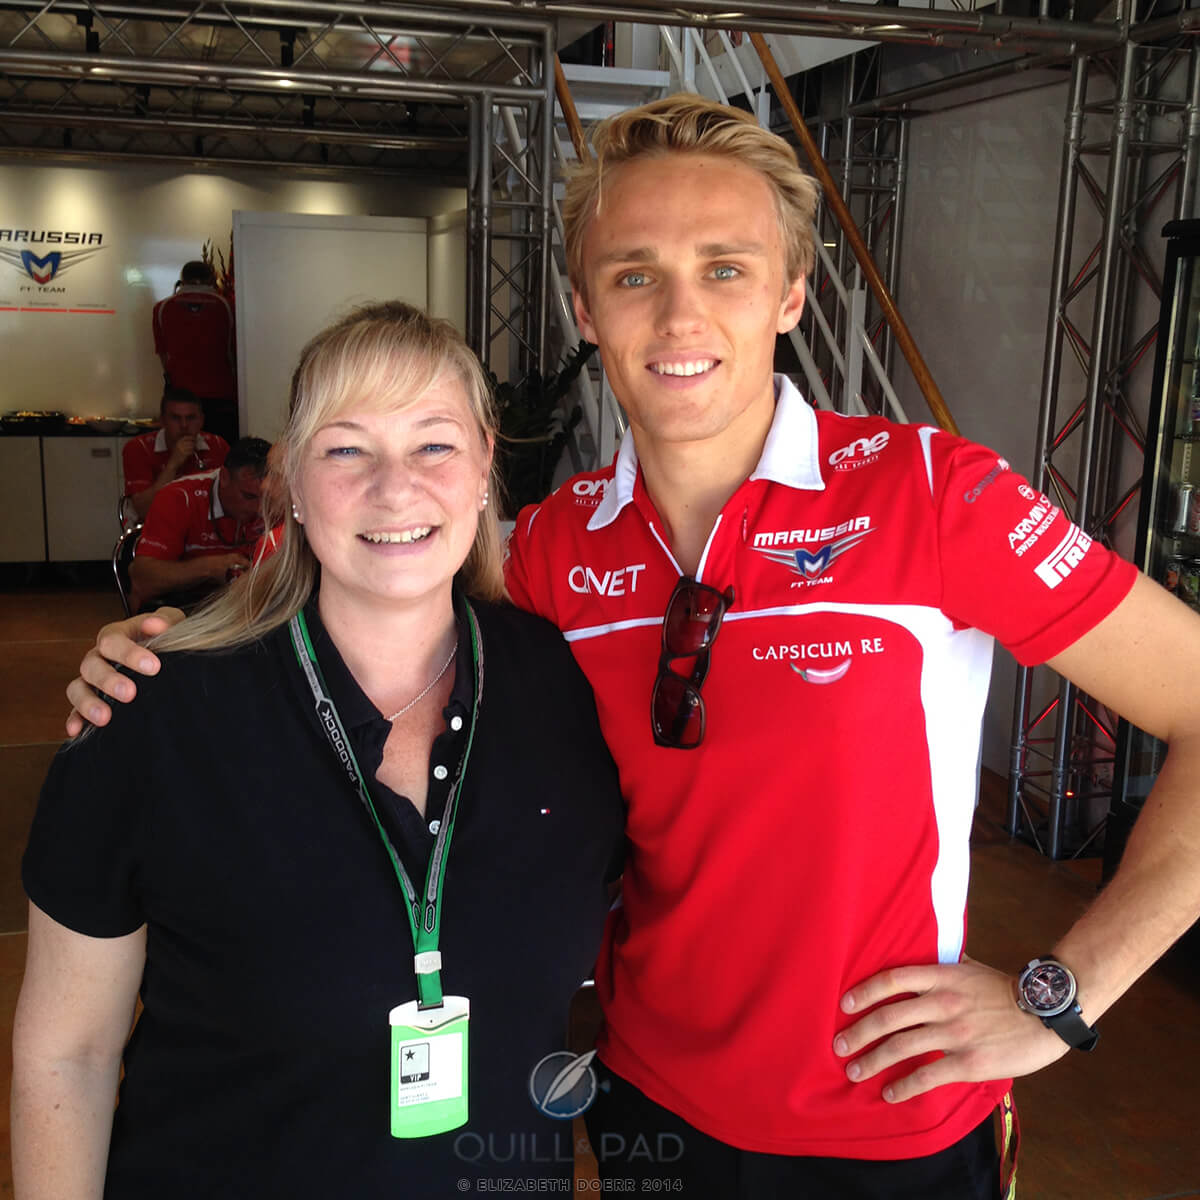 Your author Elizabeth Doerr with Marussia F1 driver Max Chilton